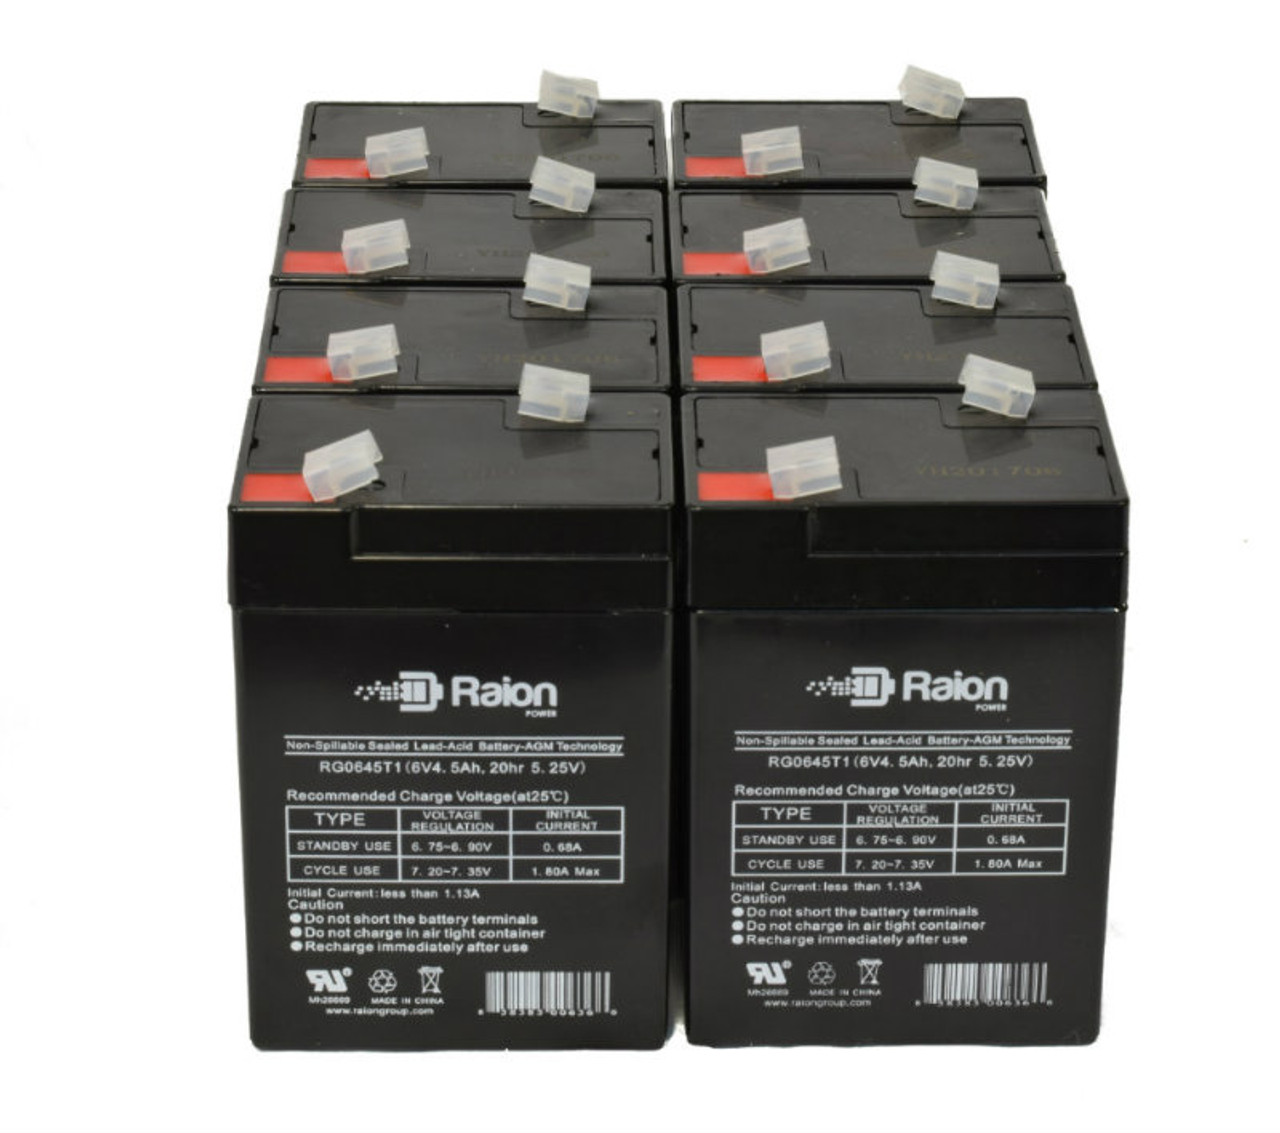 Raion Power RG0645T1 6V 4.5Ah Replacement Medical Equipment Battery for Luxtec UltraLite Headlight System - 8 Pack